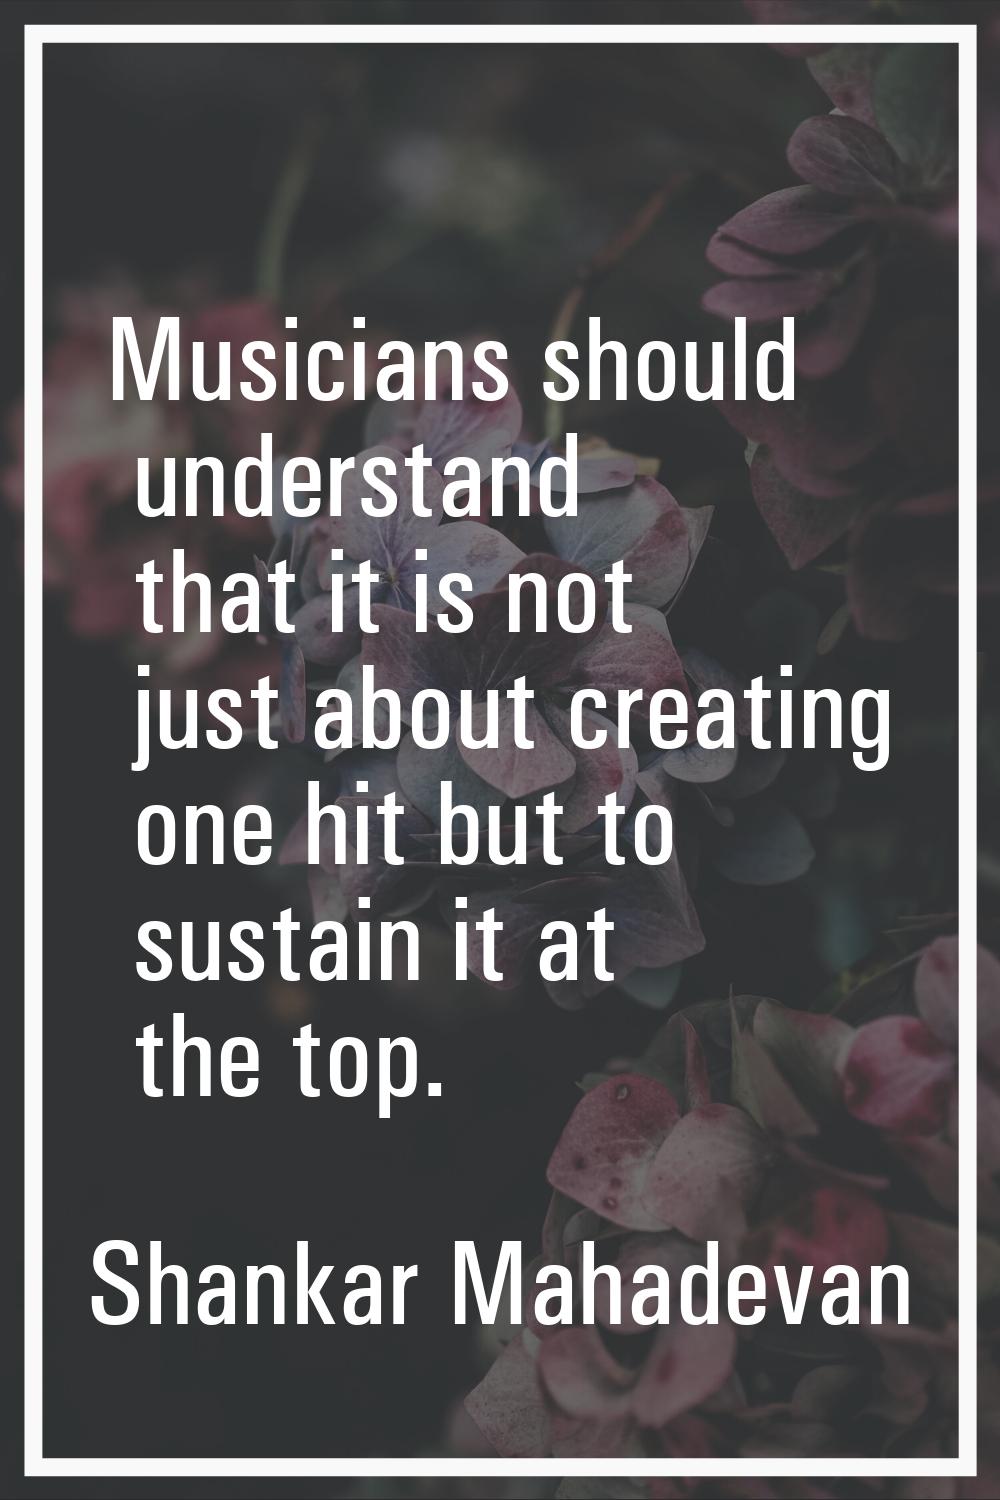 Musicians should understand that it is not just about creating one hit but to sustain it at the top